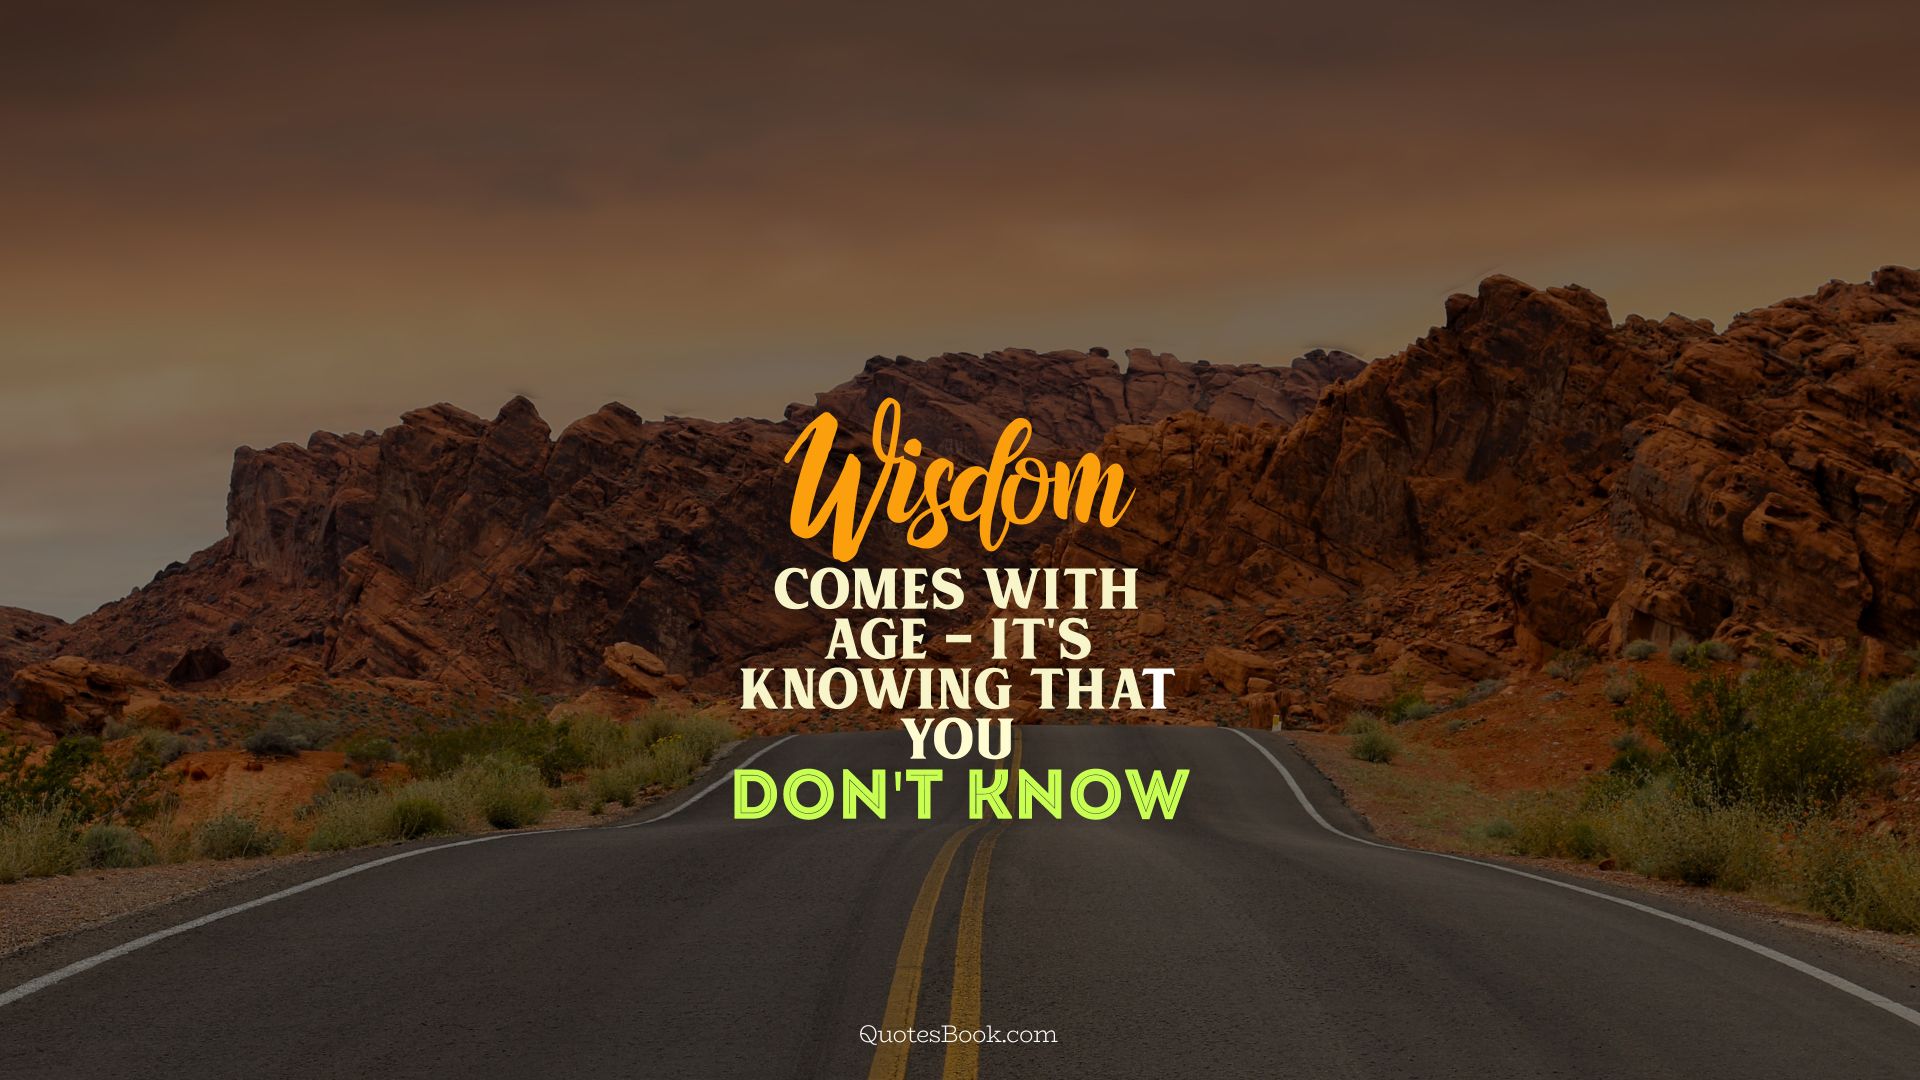 Wisdom comes with age - it's knowing that you don't know